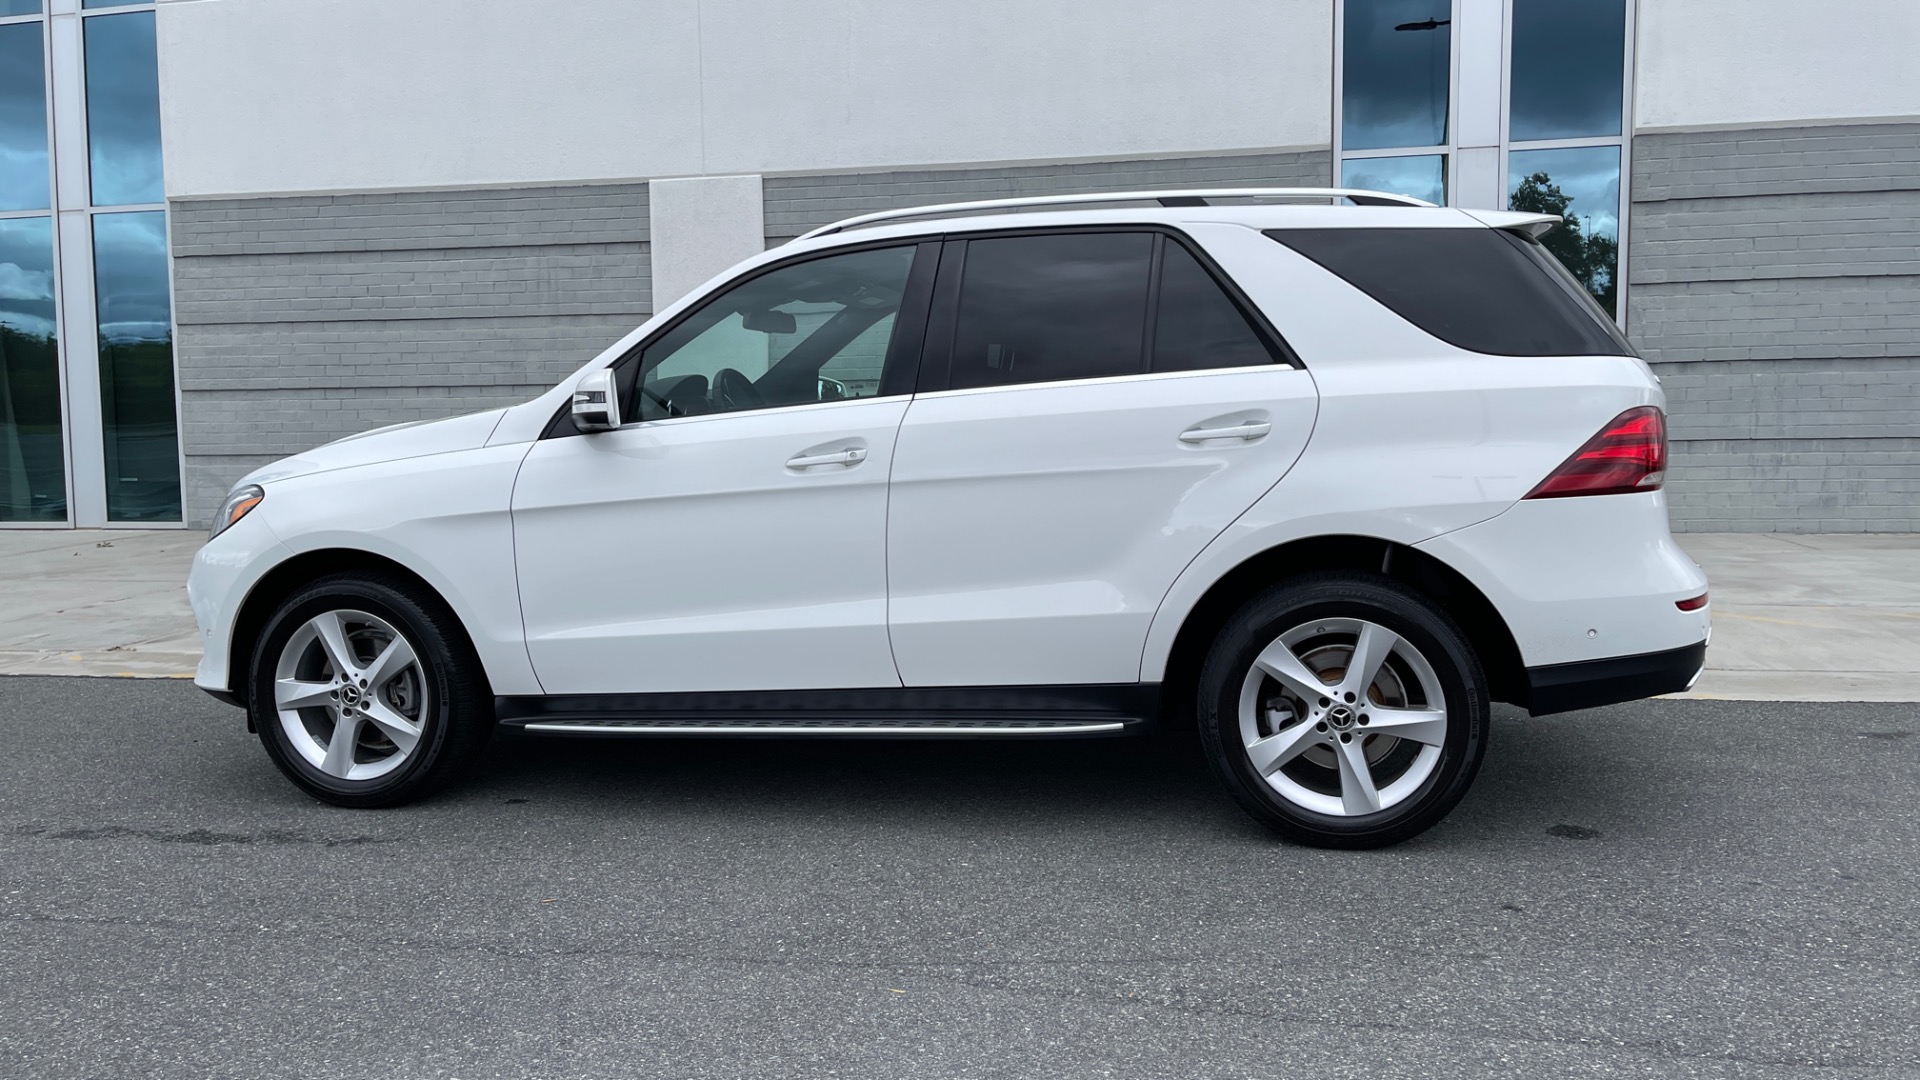 Used 2018 Mercedes-Benz GLE GLE 350 / PREMIUM 2 PACKAGE / PARKING ASSIST / HARMAN KARDON / PANO ROOF for sale Sold at Formula Imports in Charlotte NC 28227 3